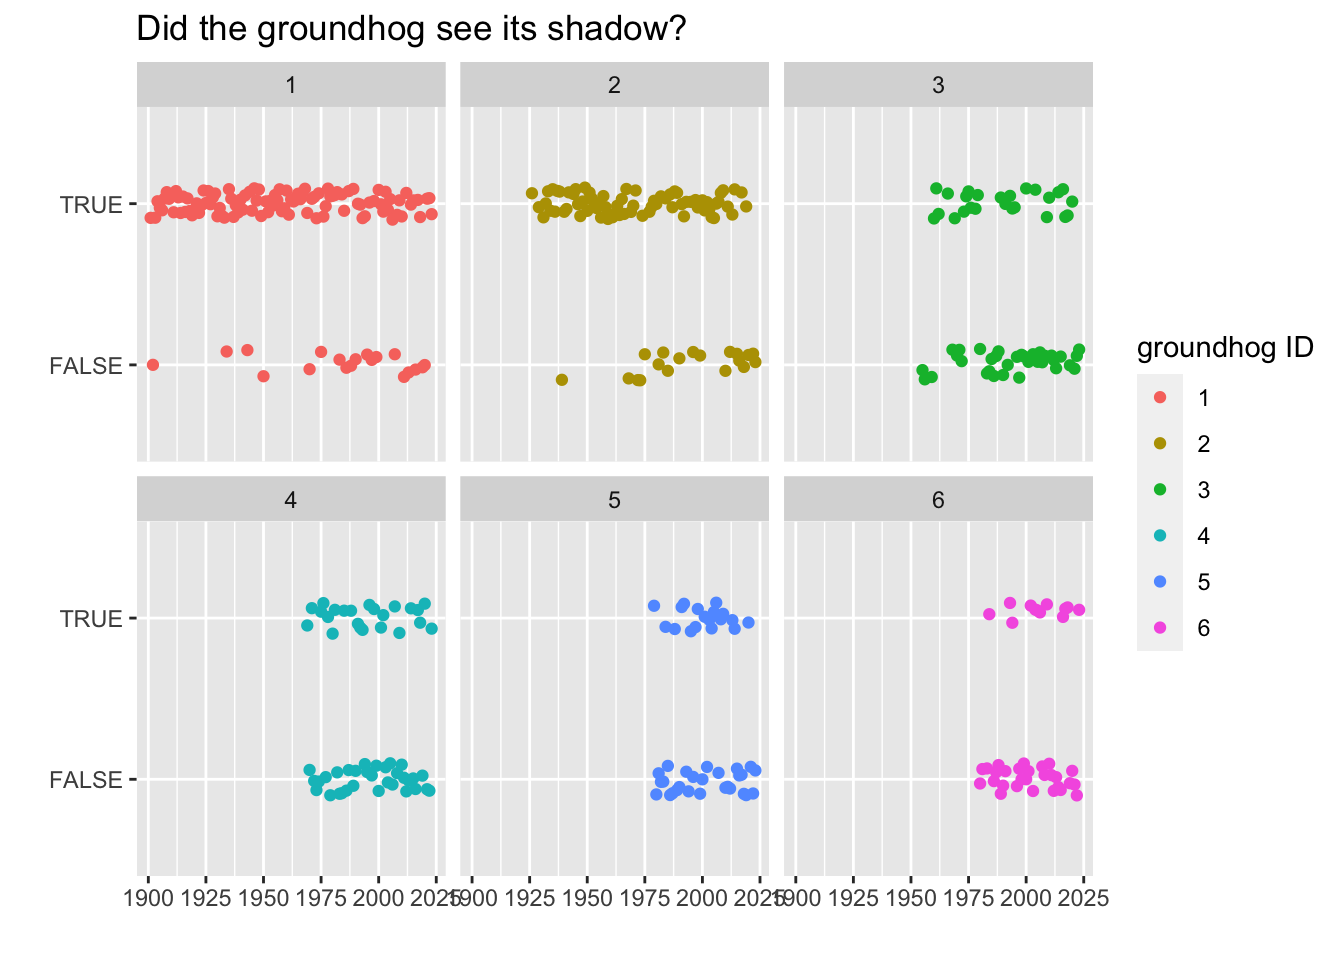 Scatterplots with year on the x-axis and true or false on the y-axis.  There are six separate plots, one for each of the six most predicting groundhogs.  Punxsutawney Phil almost always sees his shadow, while the other groundhogs are much more balanced in their predictions.